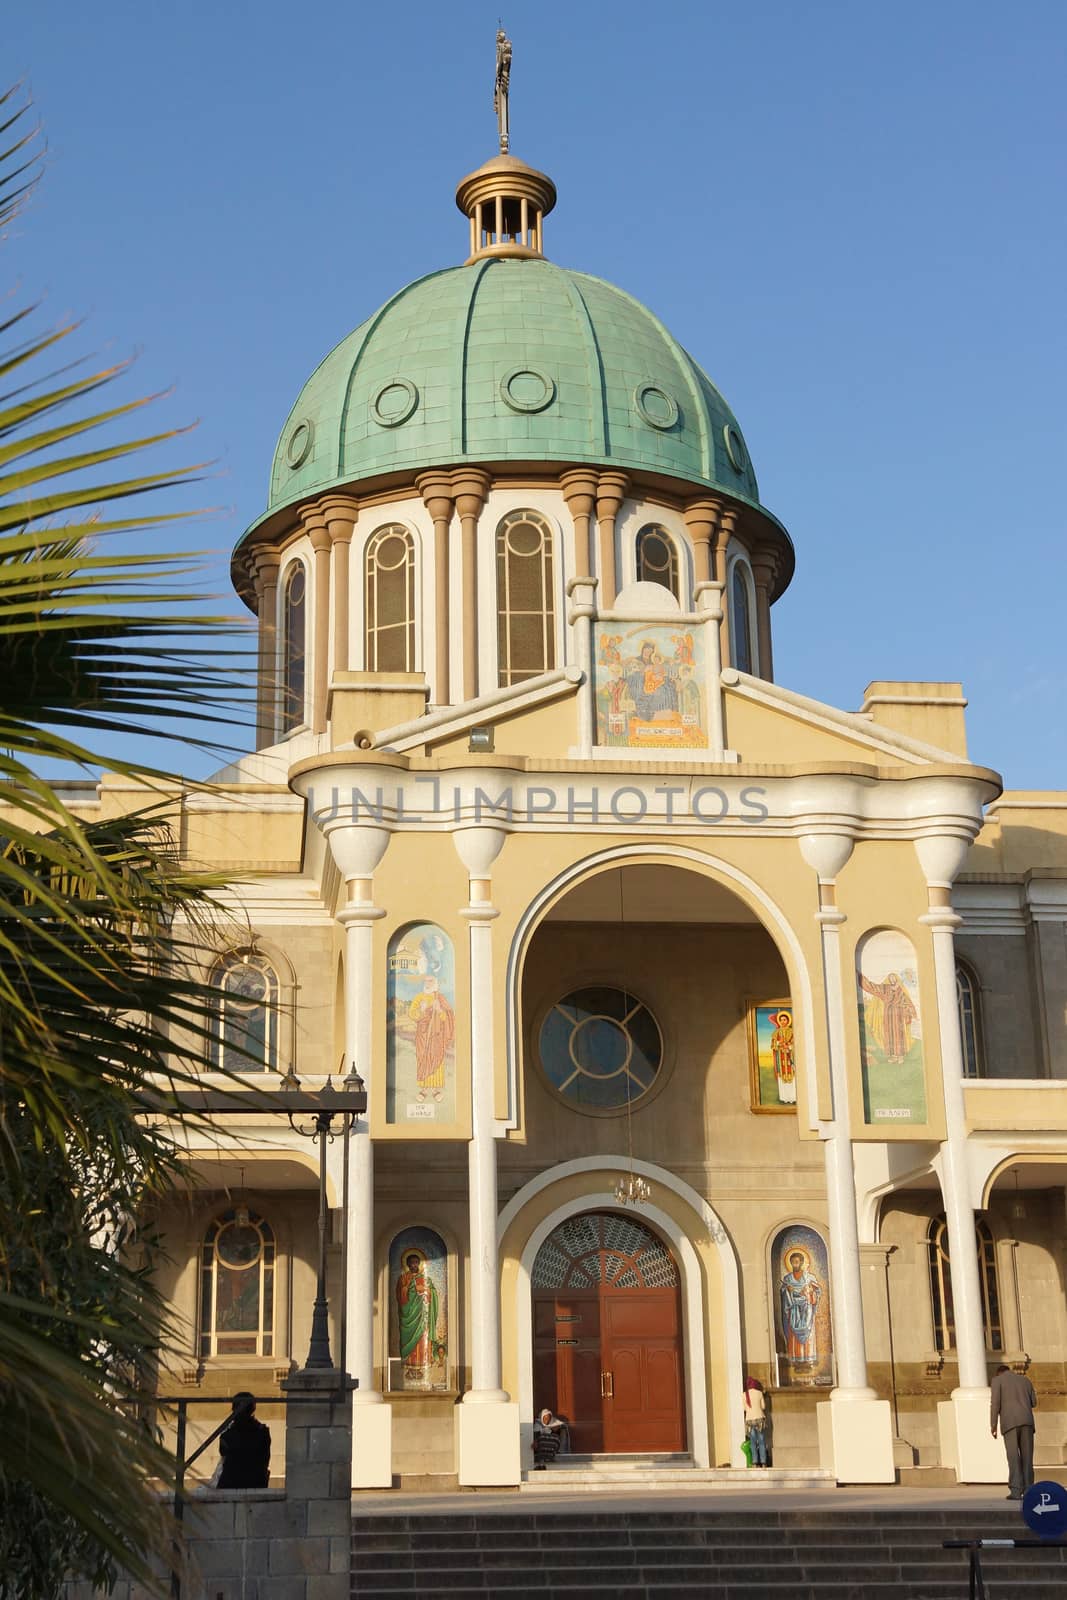 ADDIS ABABA, ETHIOPIA - DECEMBER 5, 2014: Selassie Cathedral in the last light of a day on December 5, 2014 in Addis Ababa, Ethiopia, Africa